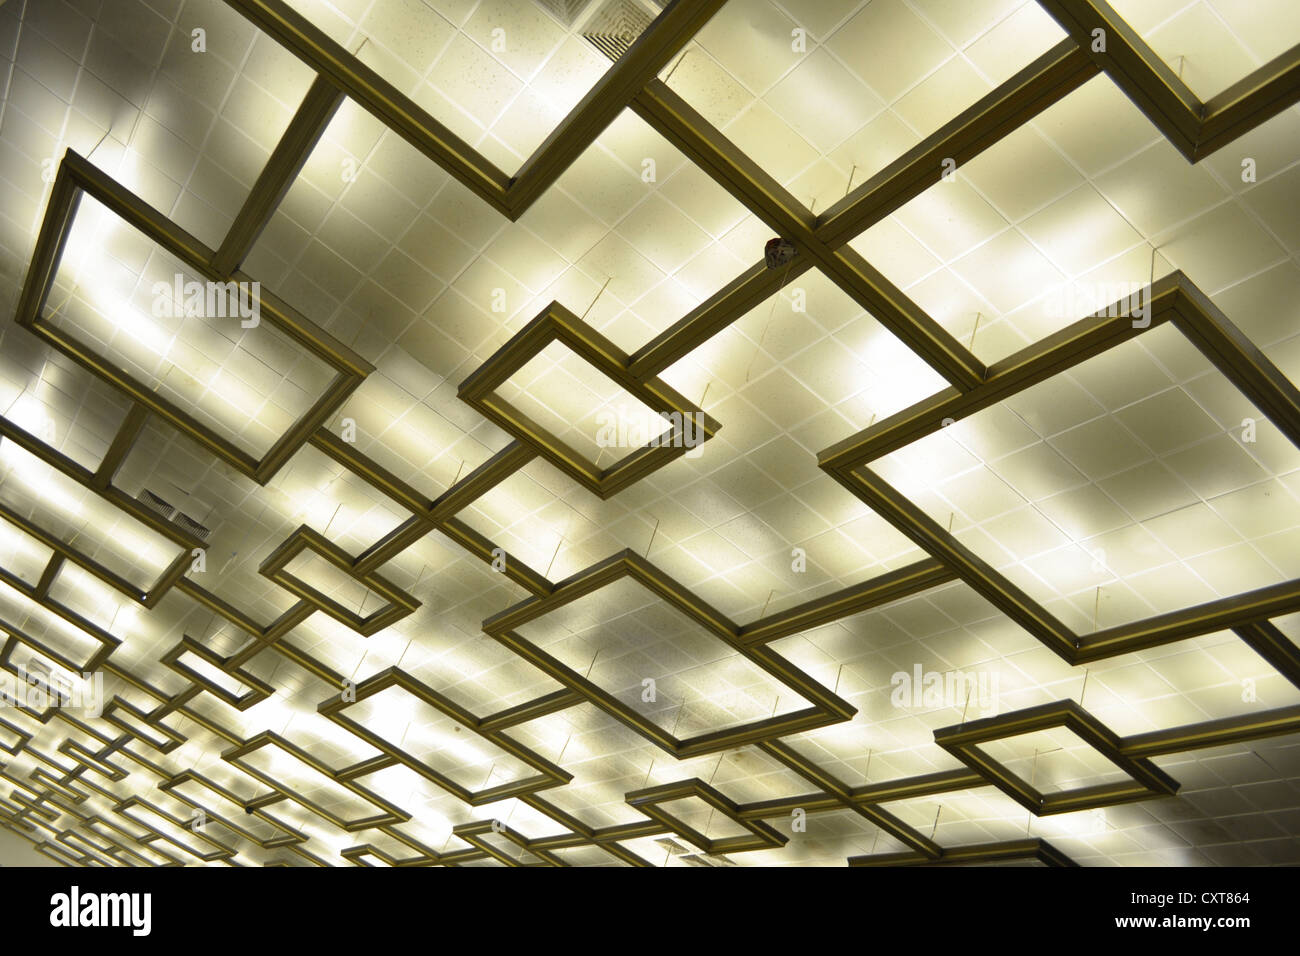 Futuristic Roof Ceiling Background Stock Photo 50935084 Alamy